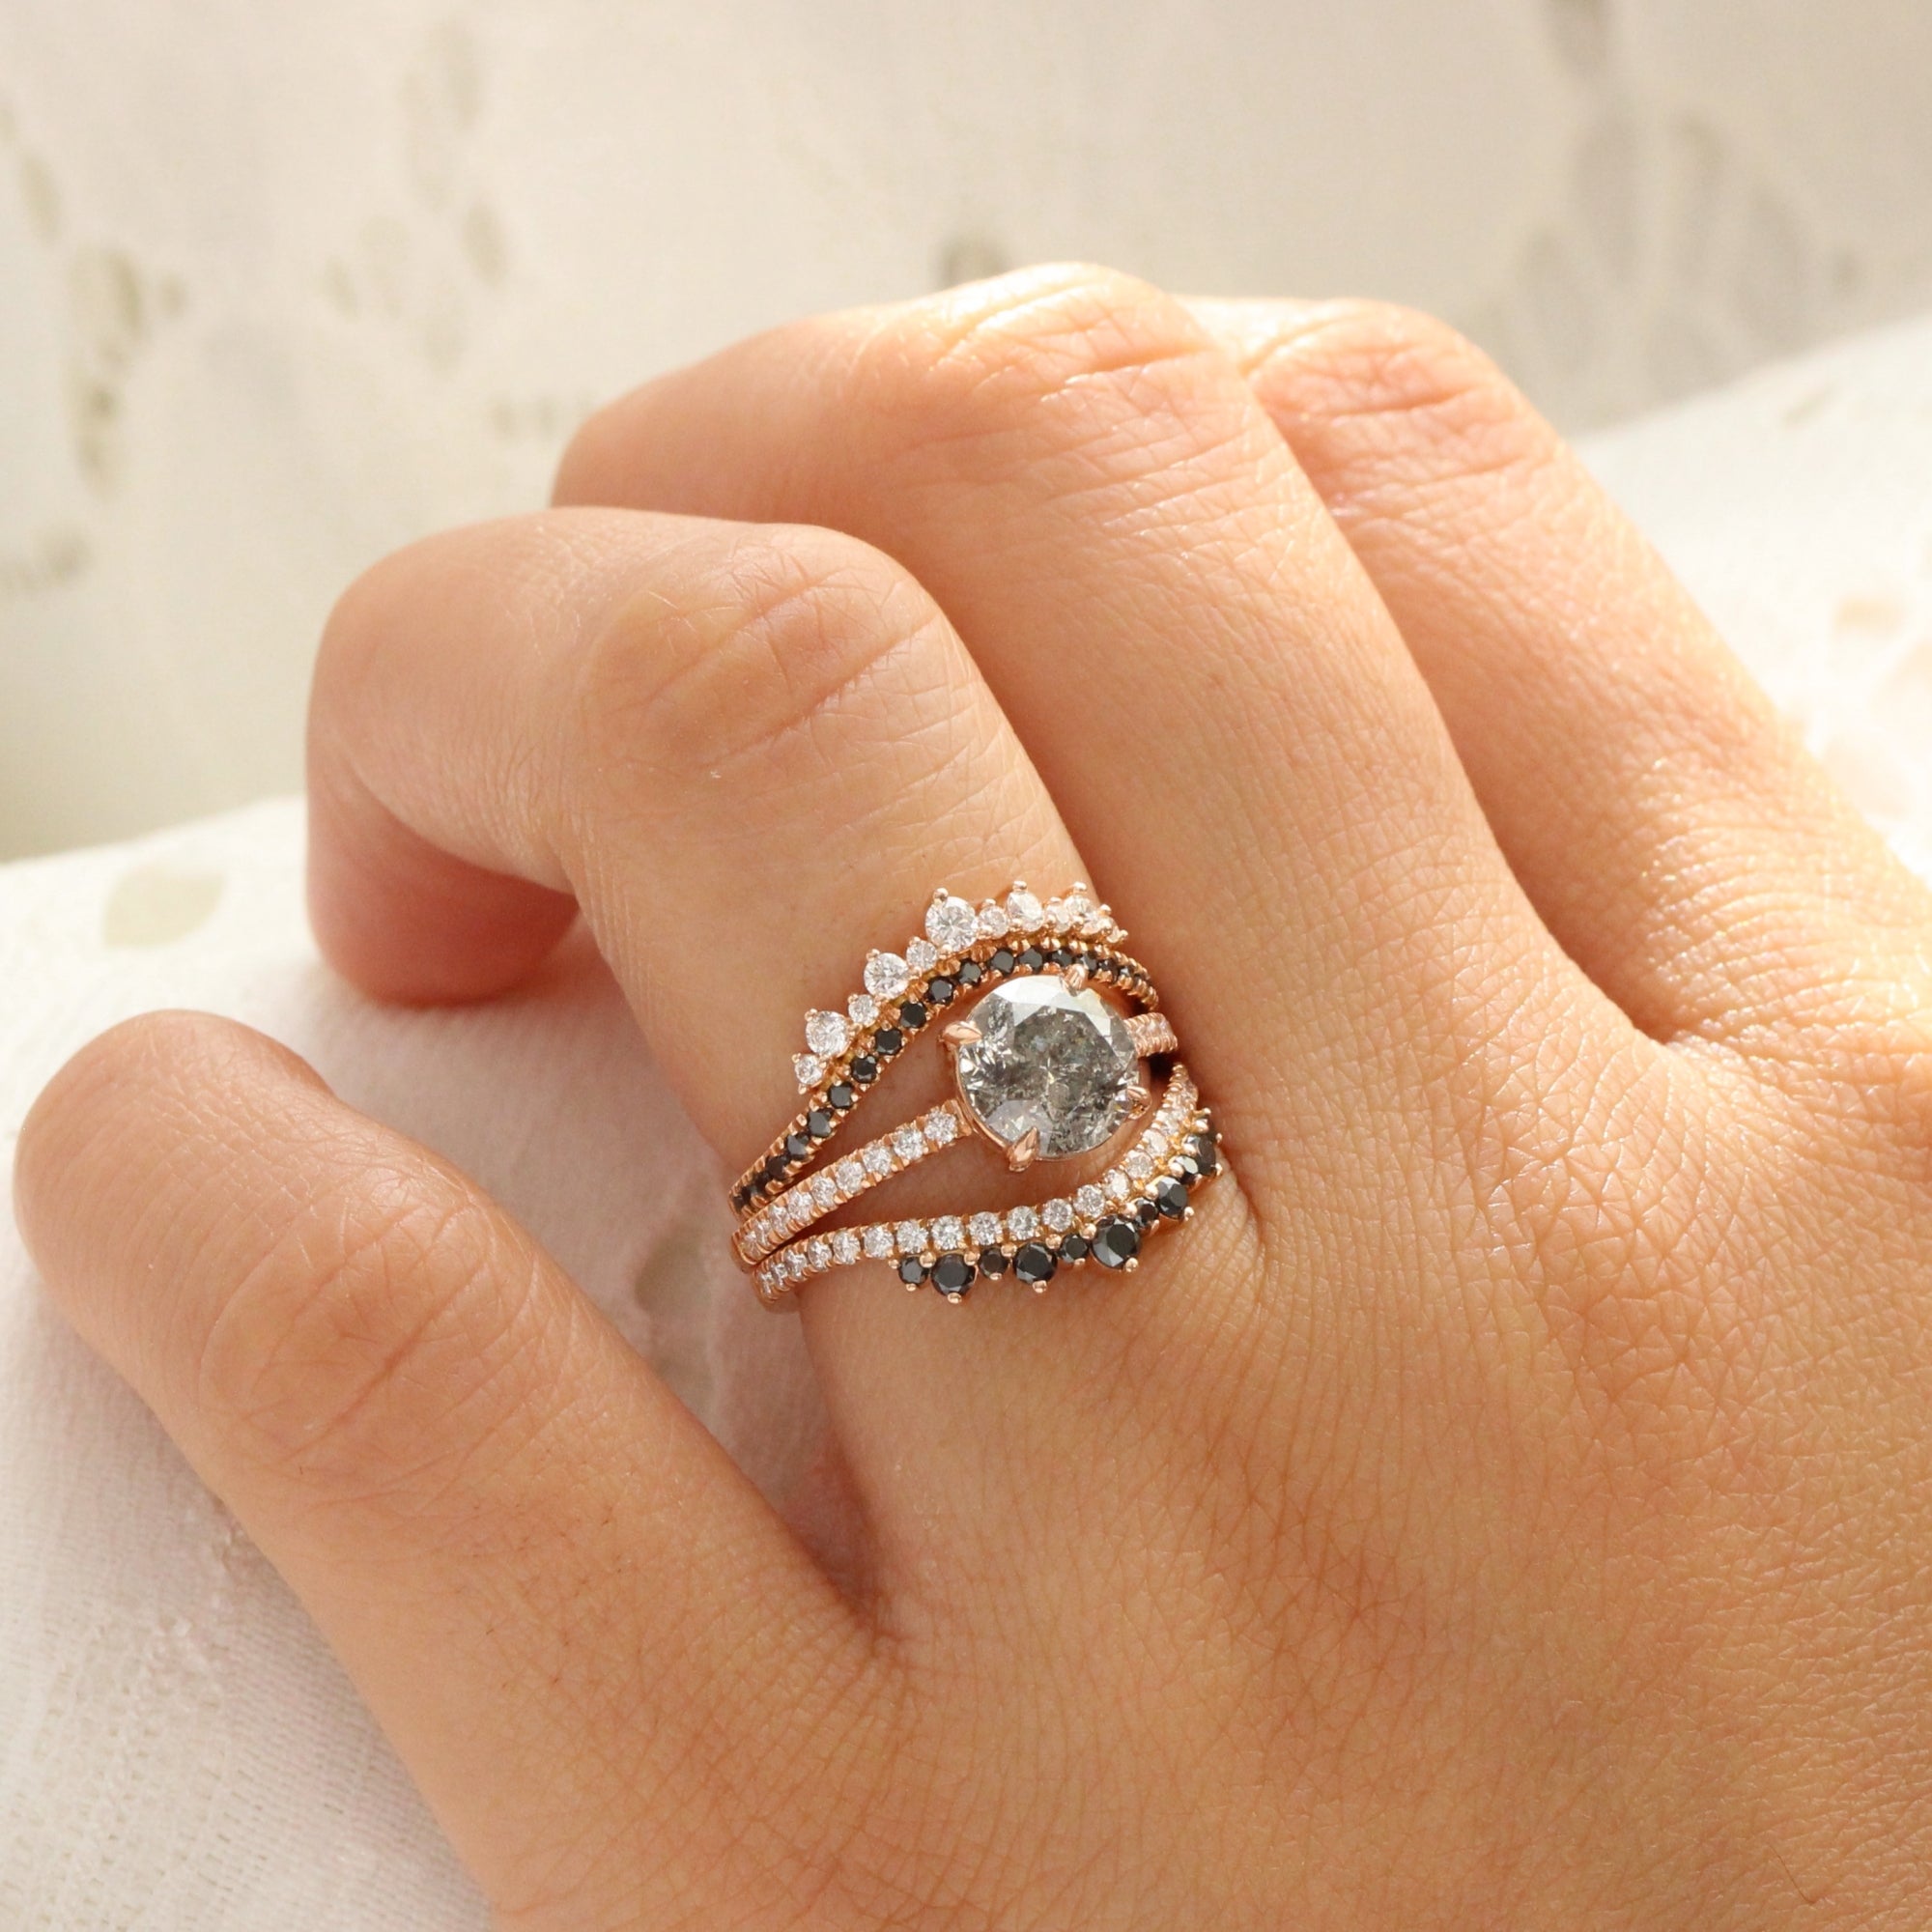 solitaire salt and pepper diamond ring rose gold low setting pave diamond engagement ring la more design jewelry